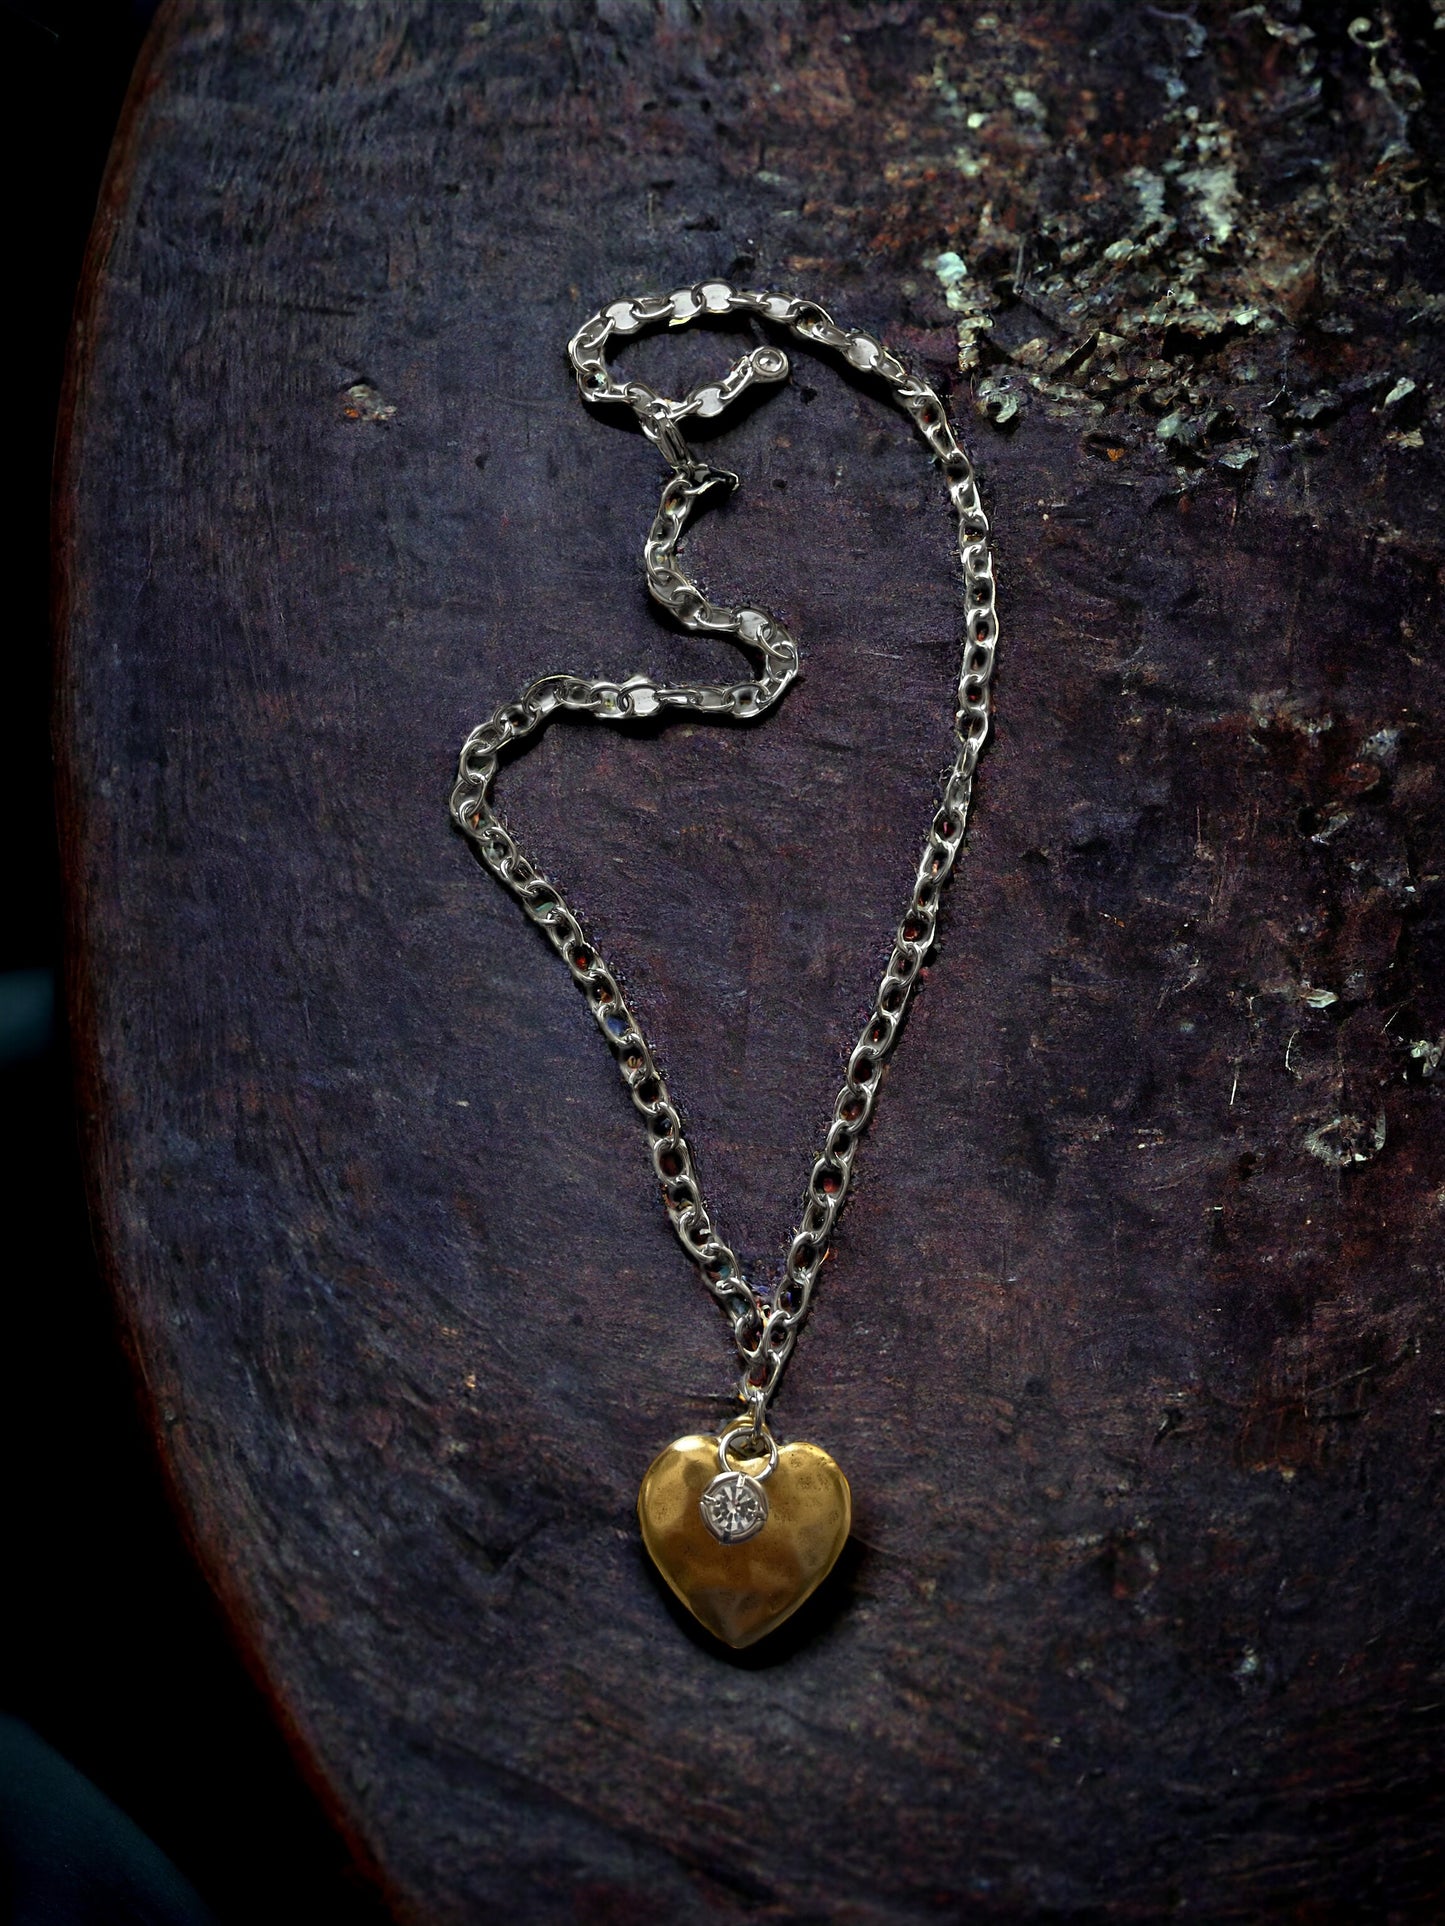 Hammered Heart Mixed Metal Artisan
Handmade Boutique Necklace